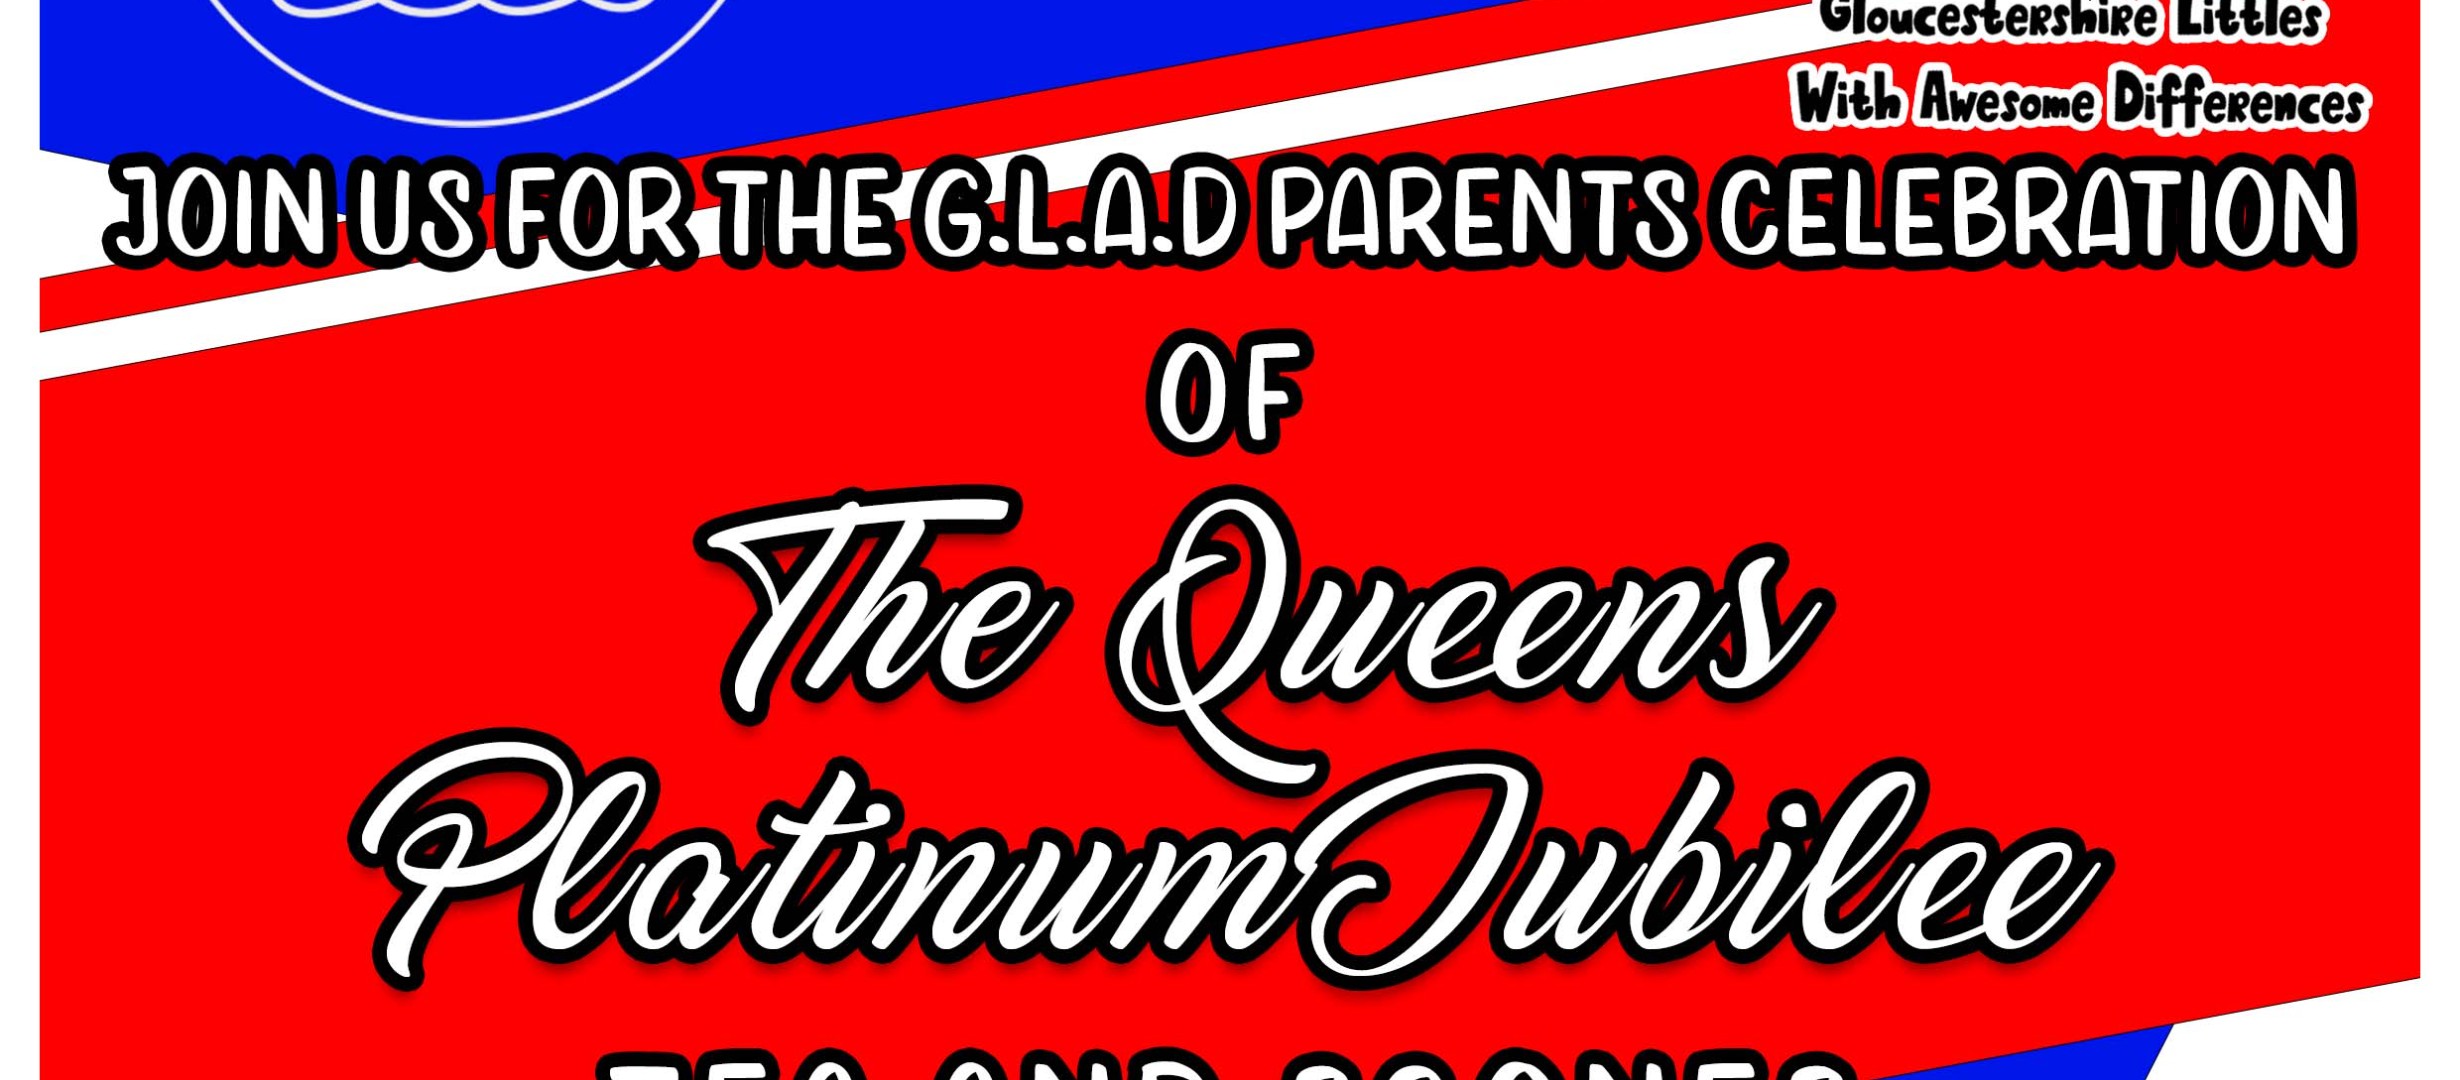 a red white and blue image reading join us for the GLAD Parents celebration of the Queens Platinum Jubilee